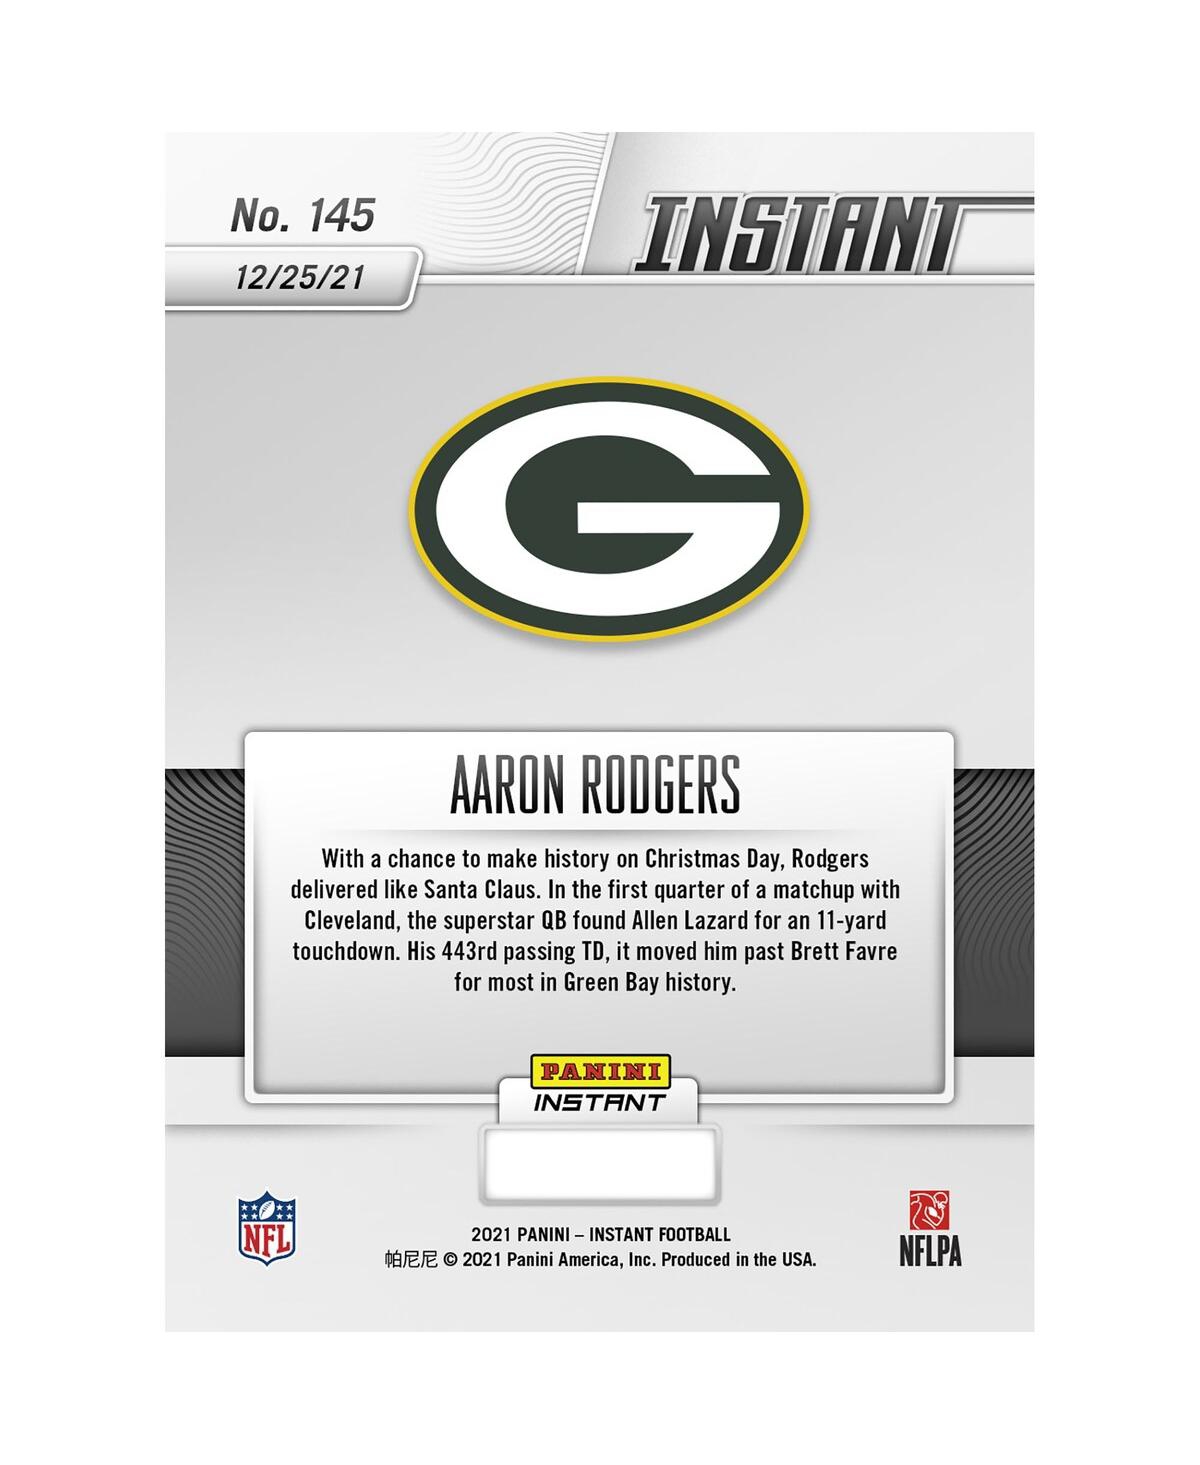 Shop Panini America Aaron Rodgers Green Bay Packers Parallel  Instant Nfl Week 16 Rodgers Breaks Favre's P In Multi